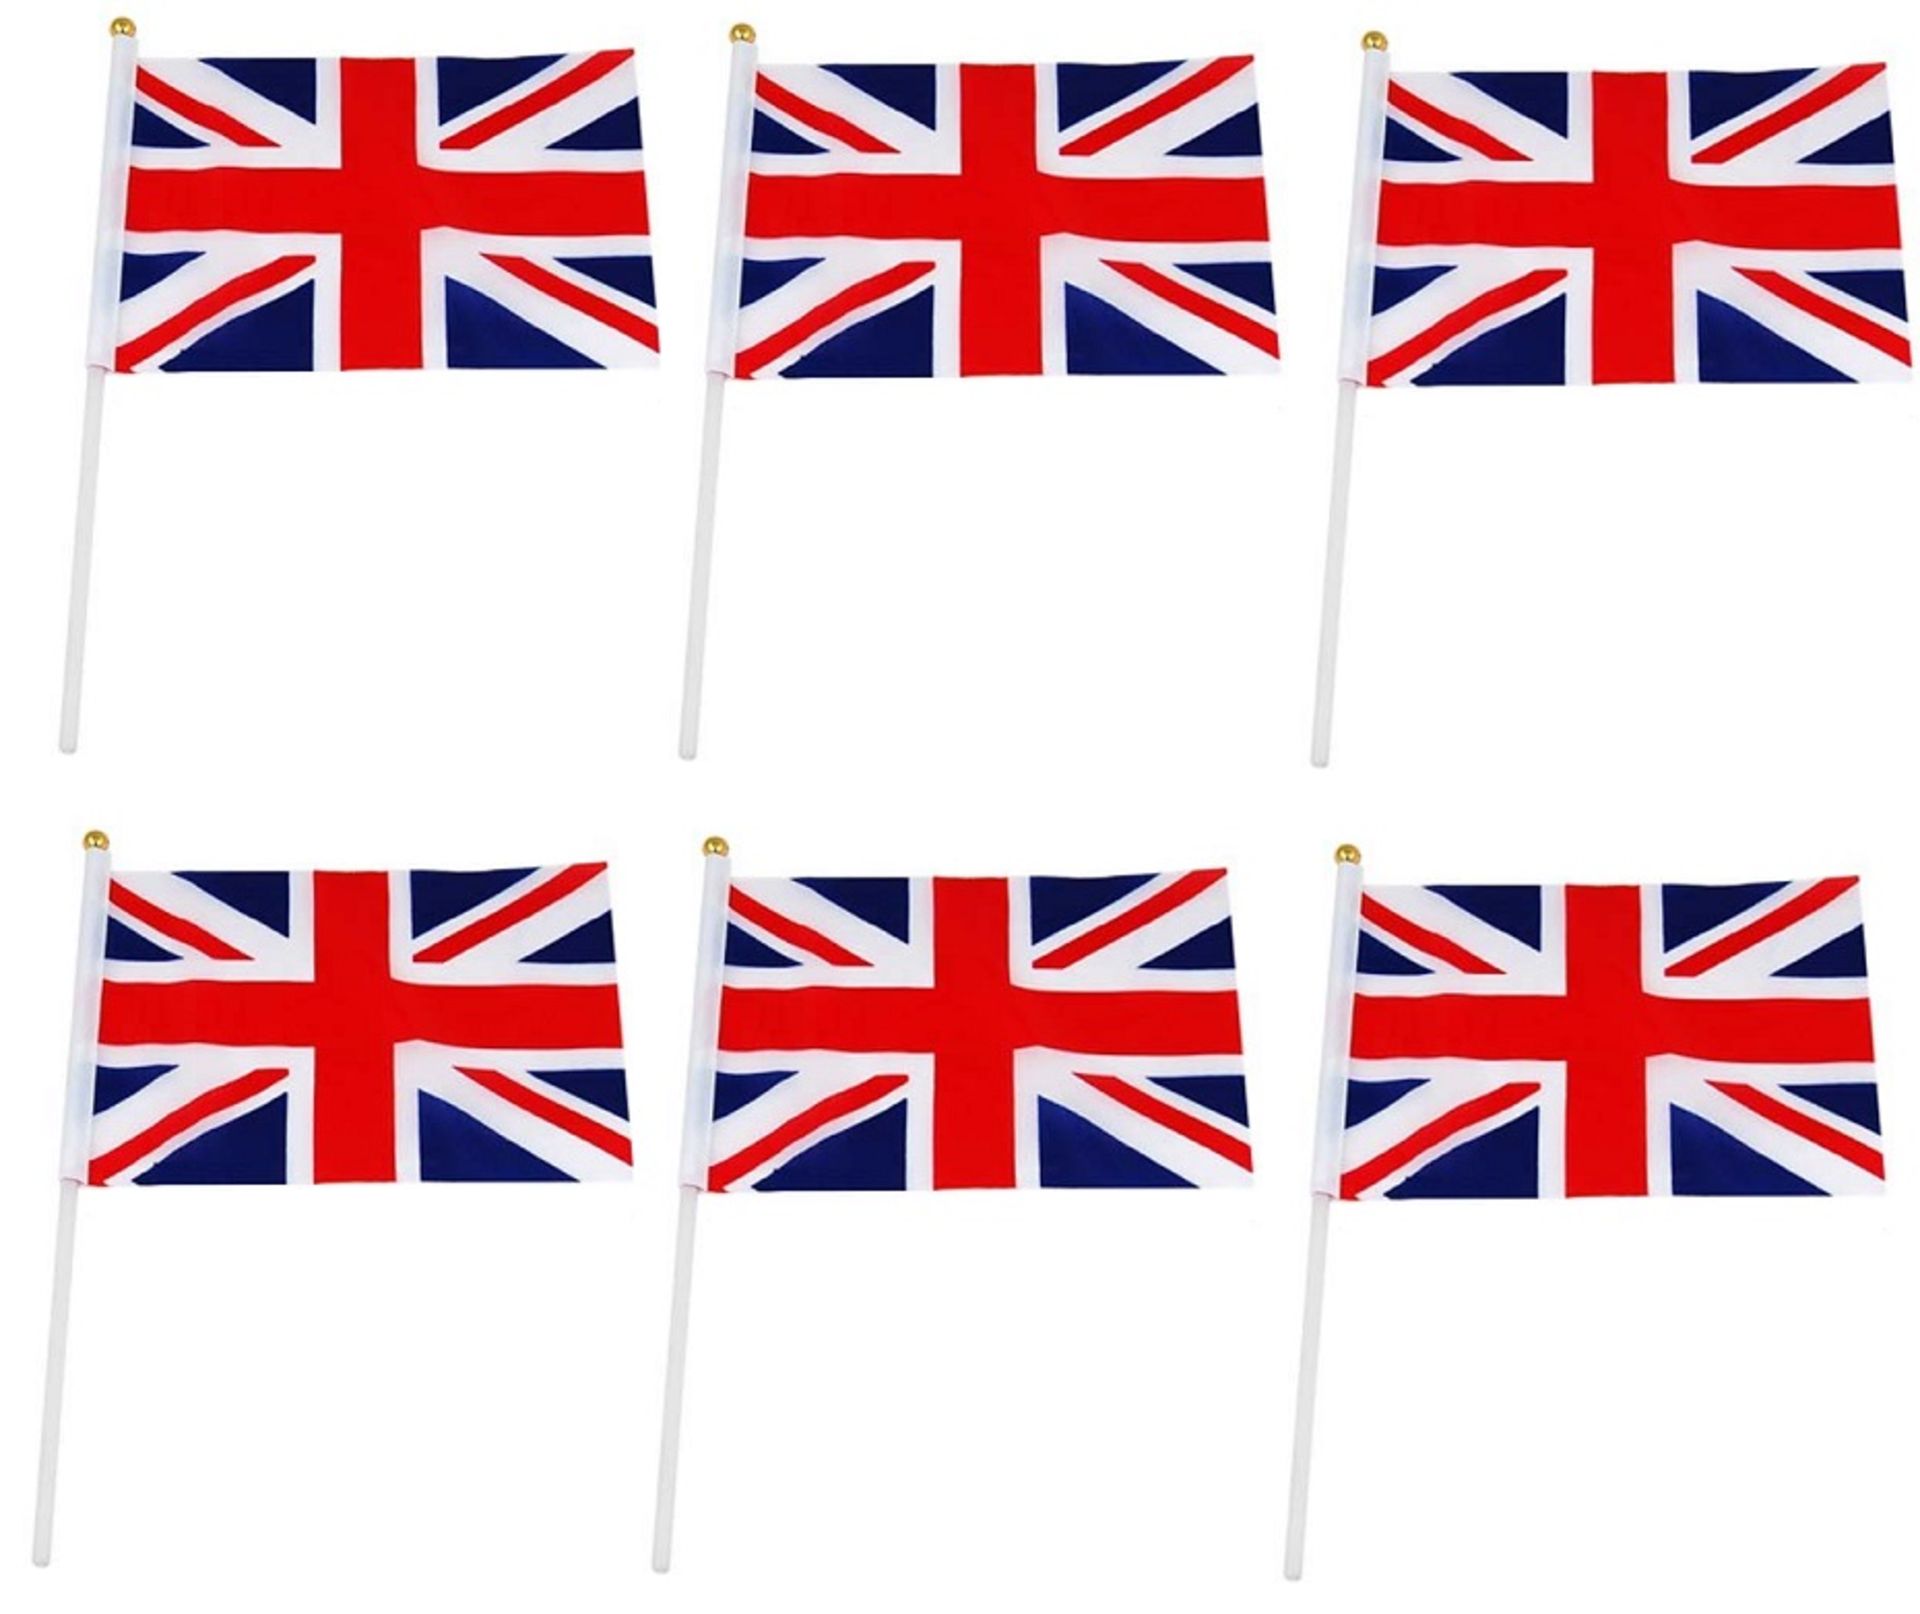 V Brand New 6 Packs Of 6 (Total 36) Fabric Union Jack Waving Flags 15 x 22 cm - Ideal For